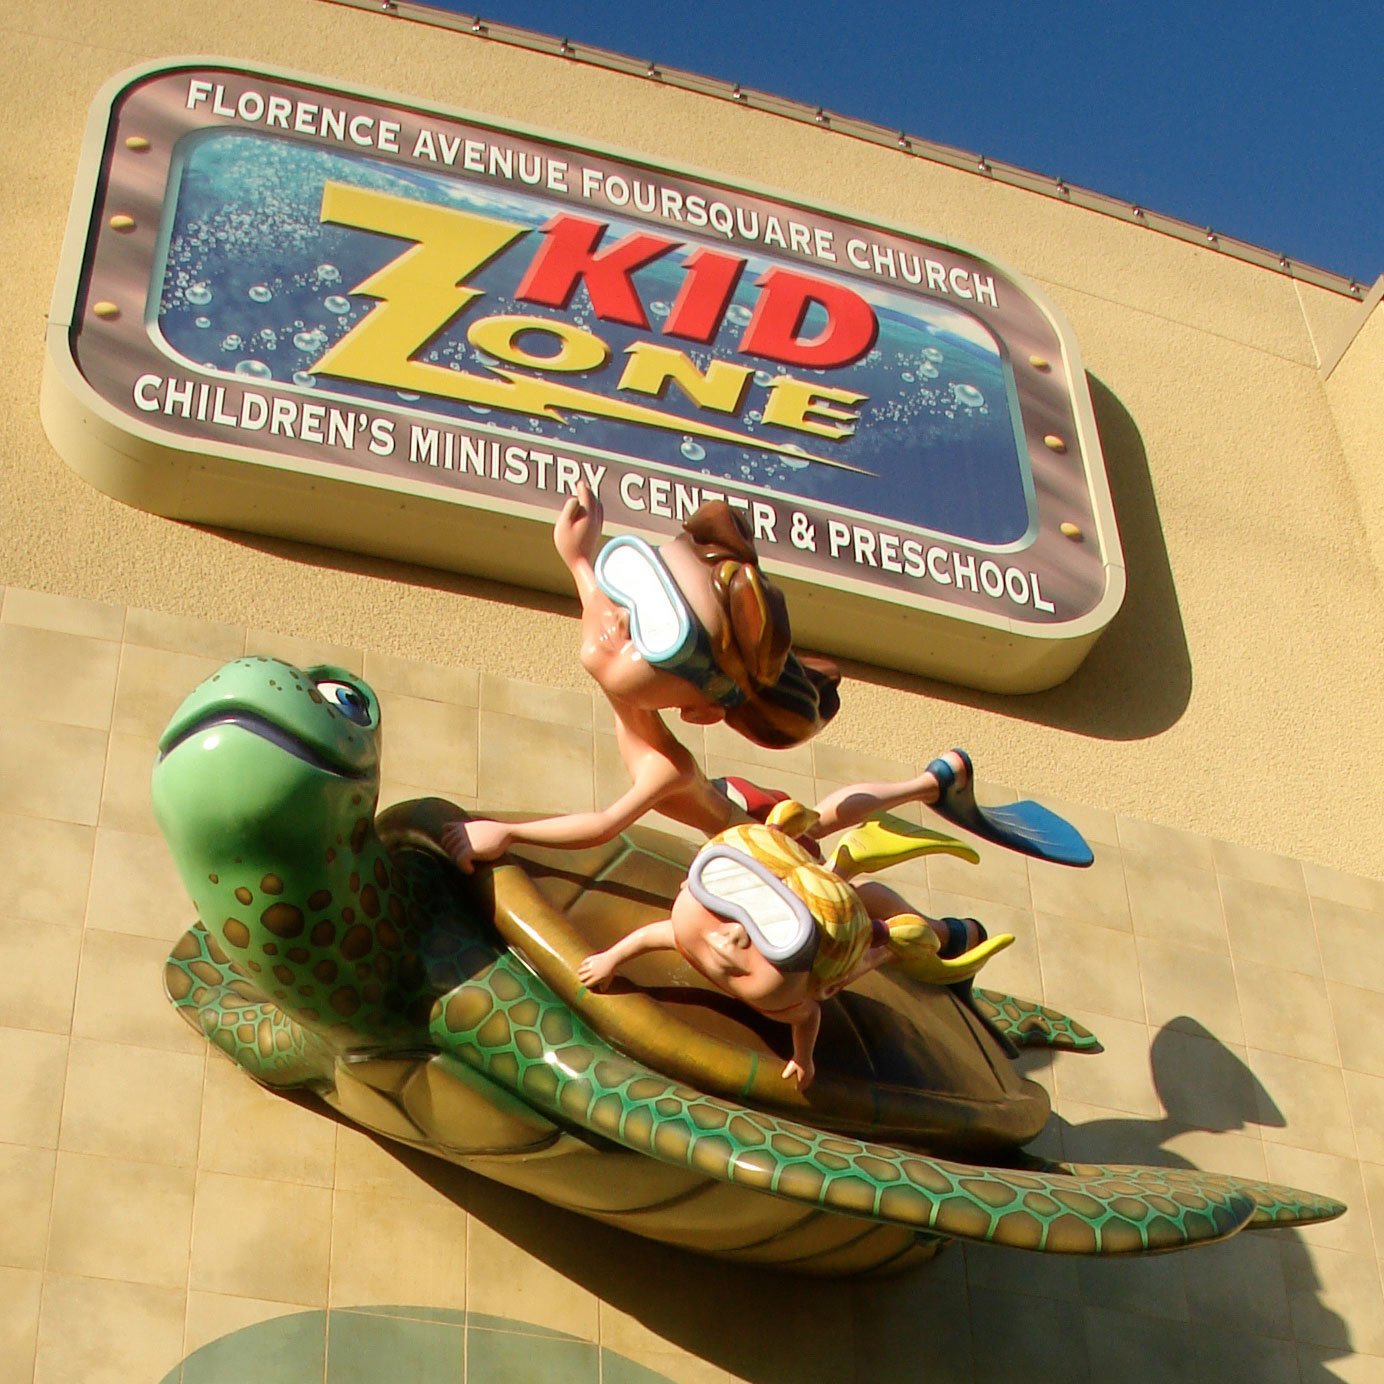 3D relief Sculpted Sea Turtle with two snorkeling kids riding on its back plus a sign for Florence Avenue Foursquare Church Kid Zone mounted high on an outside wall of a building.